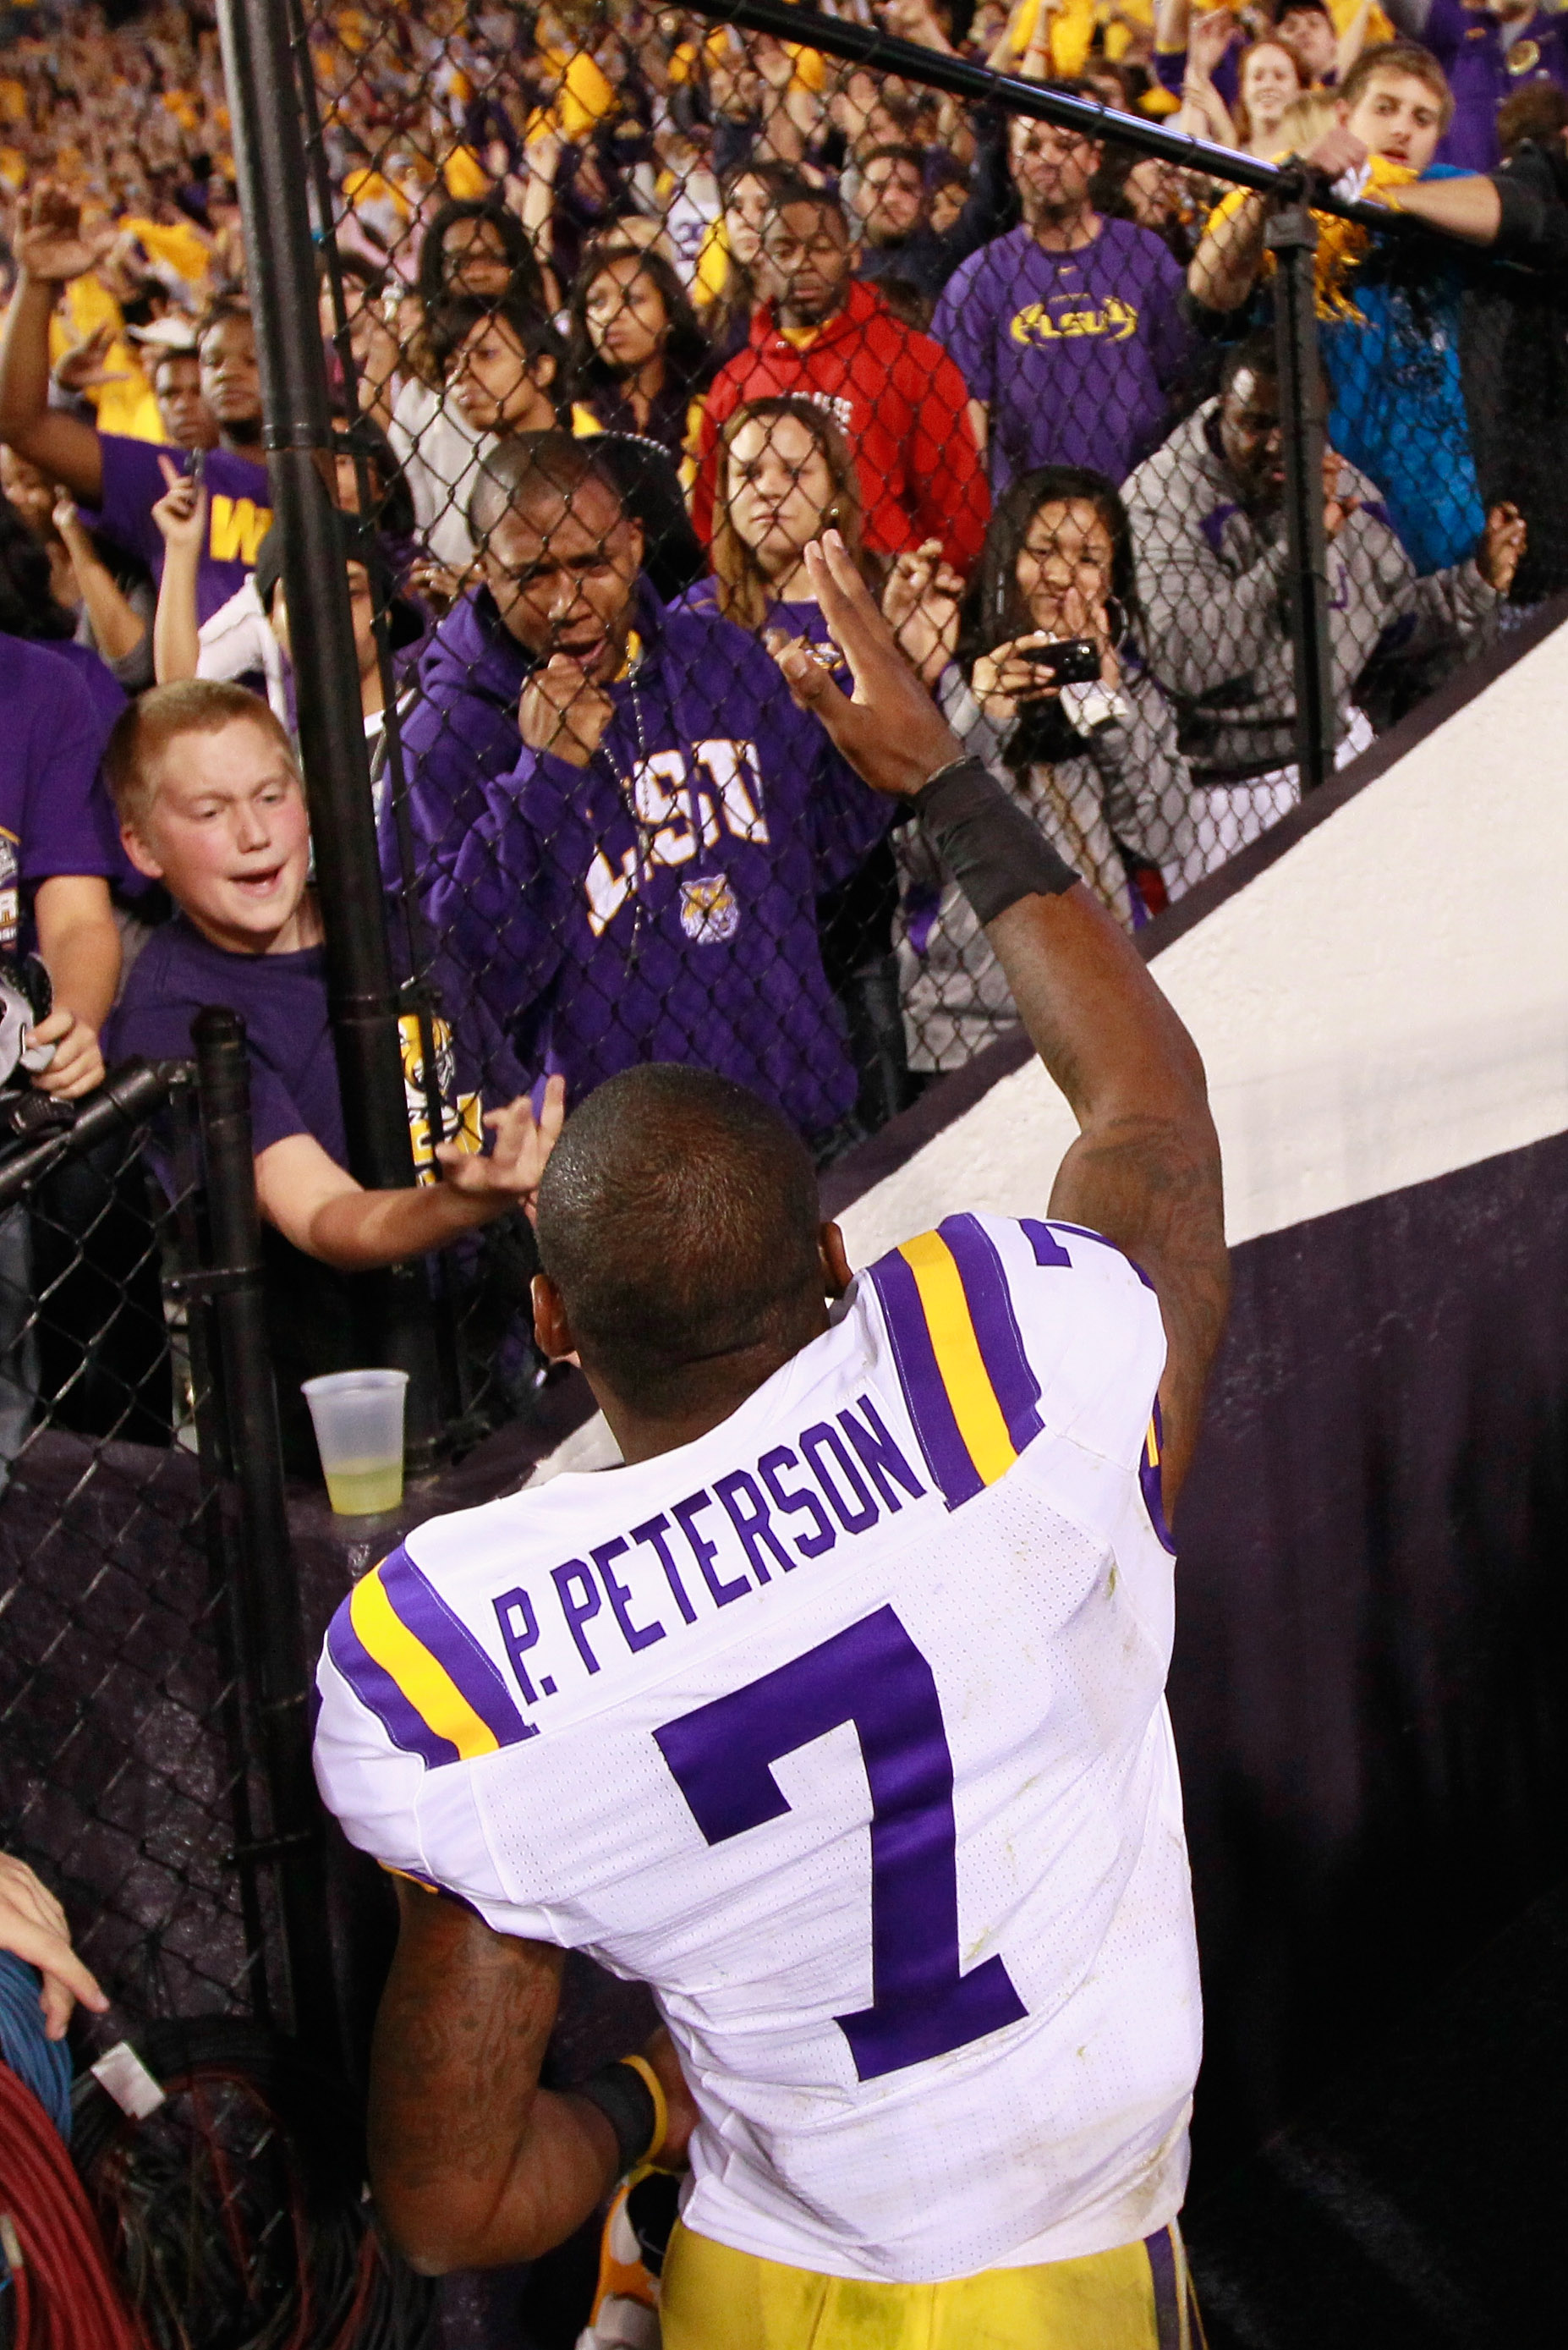 BATON ROUGE, LA - NOVEMBER 20:  Patrick Peterson #7 of the Louisiana State University Tigers reacts after their 43-36 win over the Ole Miss Rebels at Tiger Stadium on November 20, 2010 in Baton Rouge, Louisiana.  (Photo by Kevin C. Cox/Getty Images)